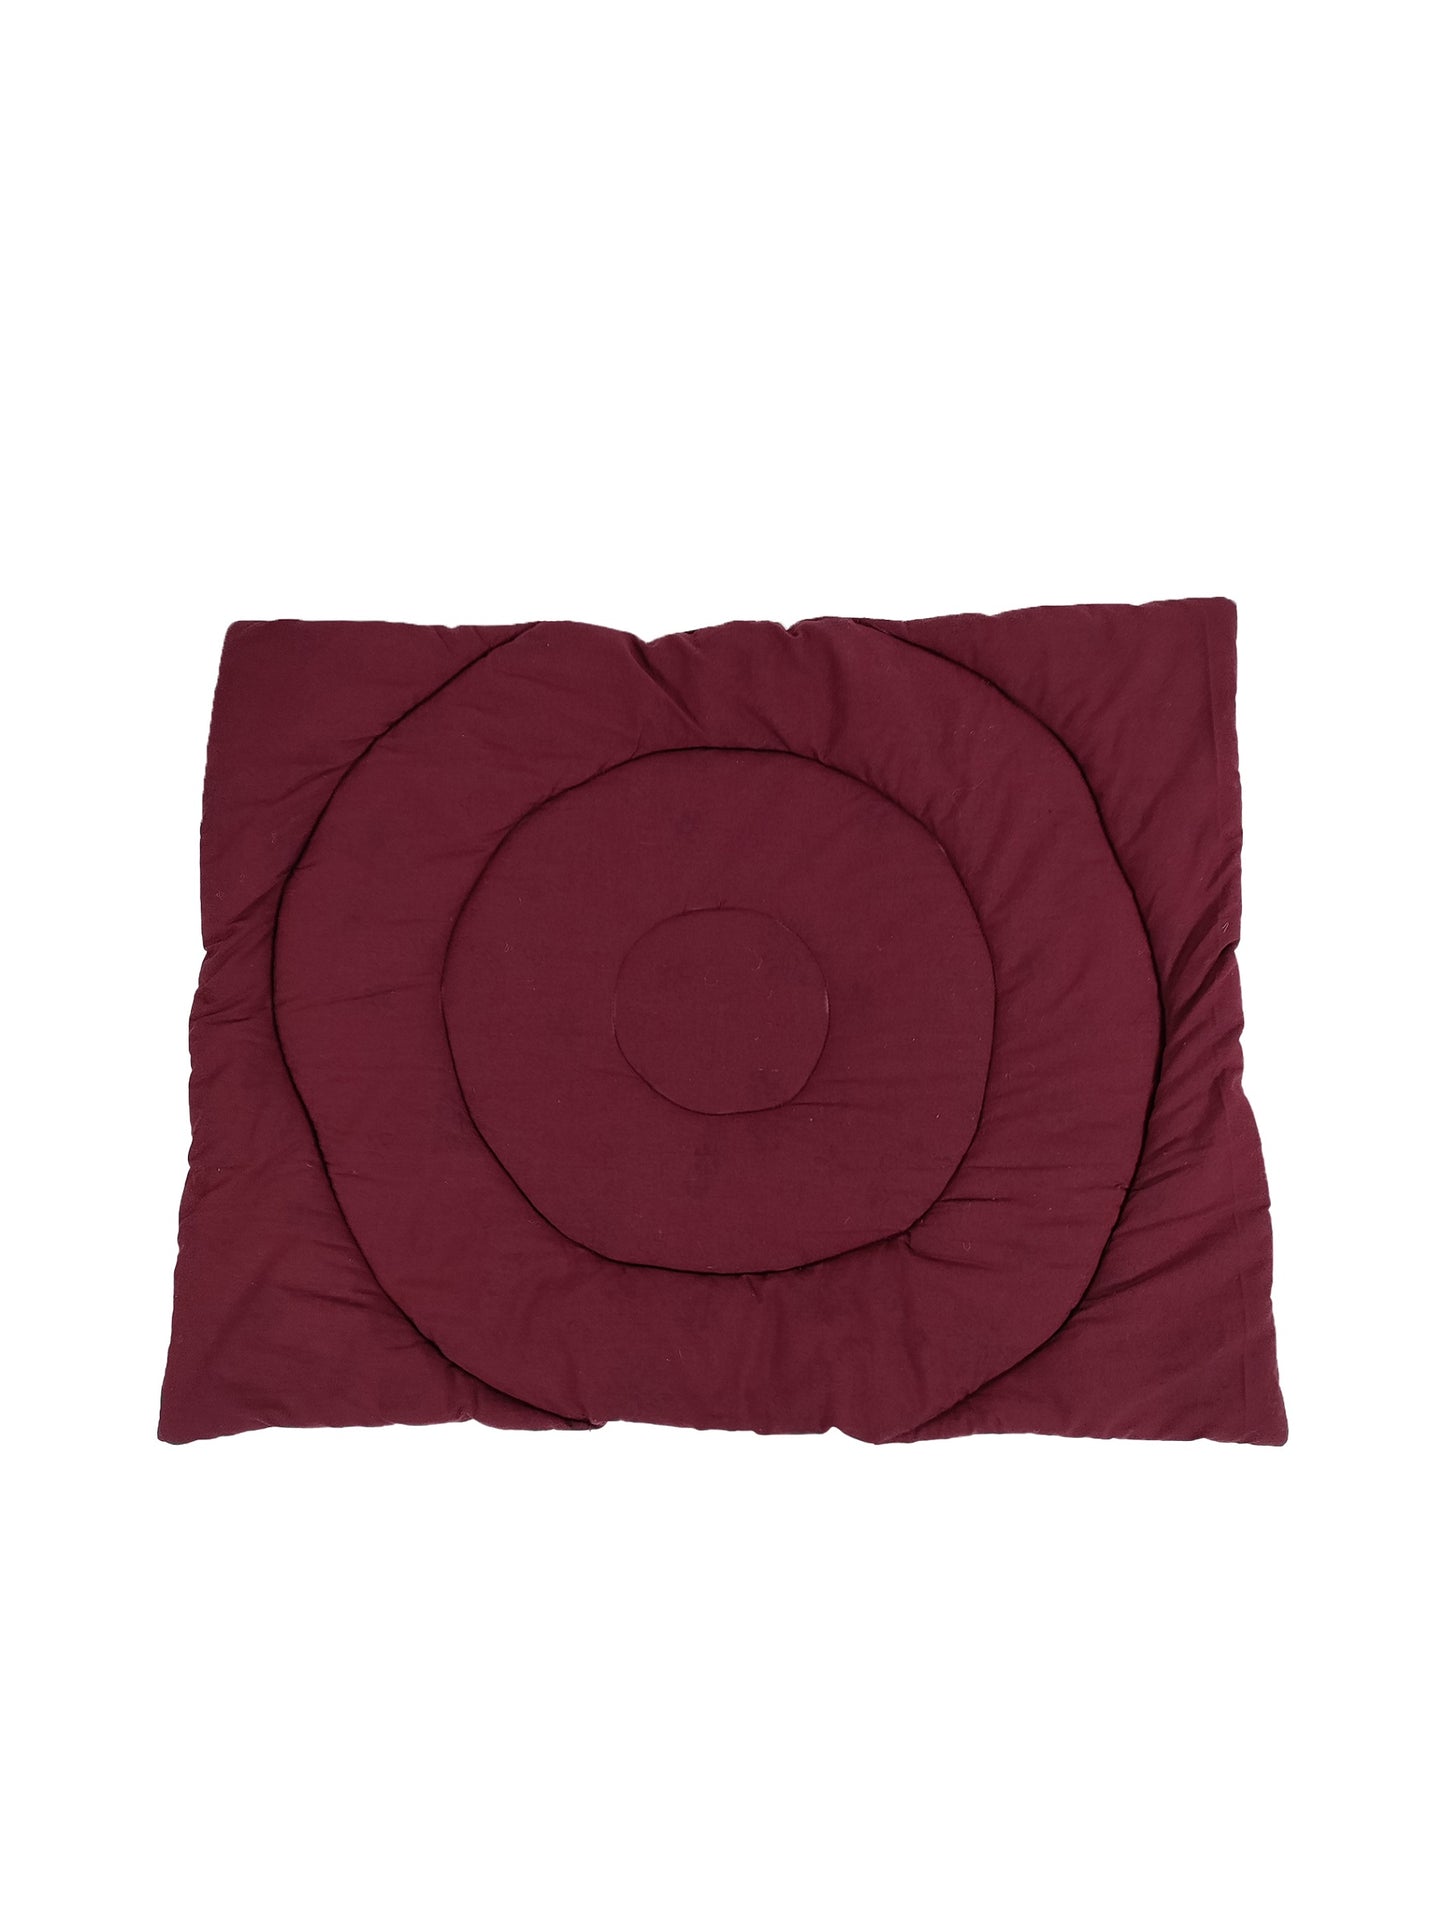 NUEVOS DOGGADIL Solid Cotton Quilted Rectangle Pet Bed Mattress | Washable Padded Pet Bed| Light Weighted Dog Mattress Maroon